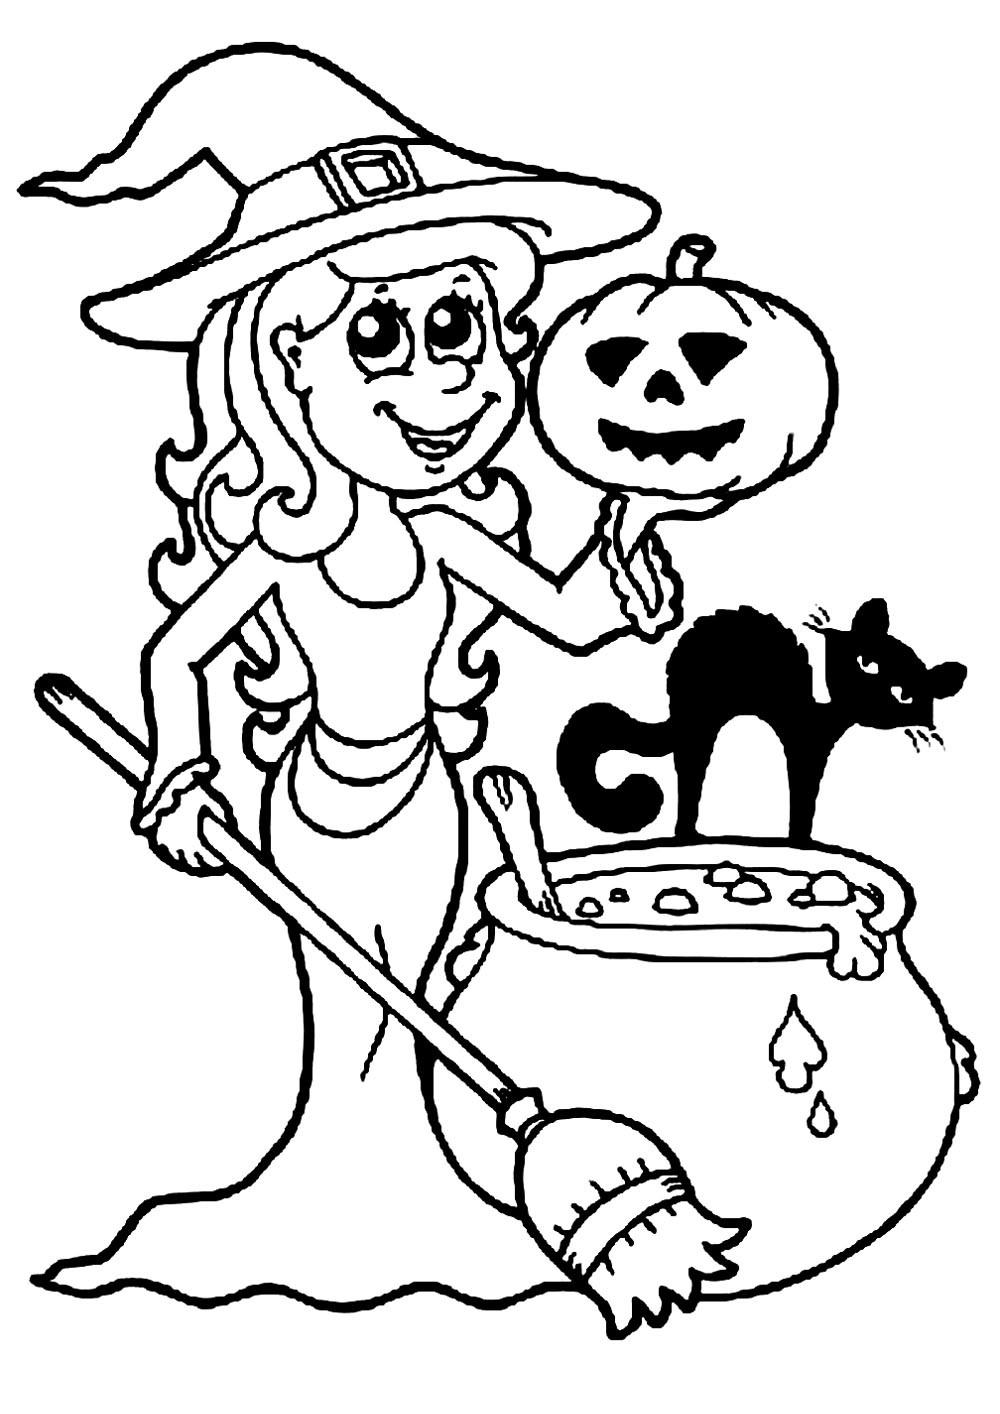 Free Online Coloring Pages For Kids
 Halloween free to color for kids Halloween Kids Coloring